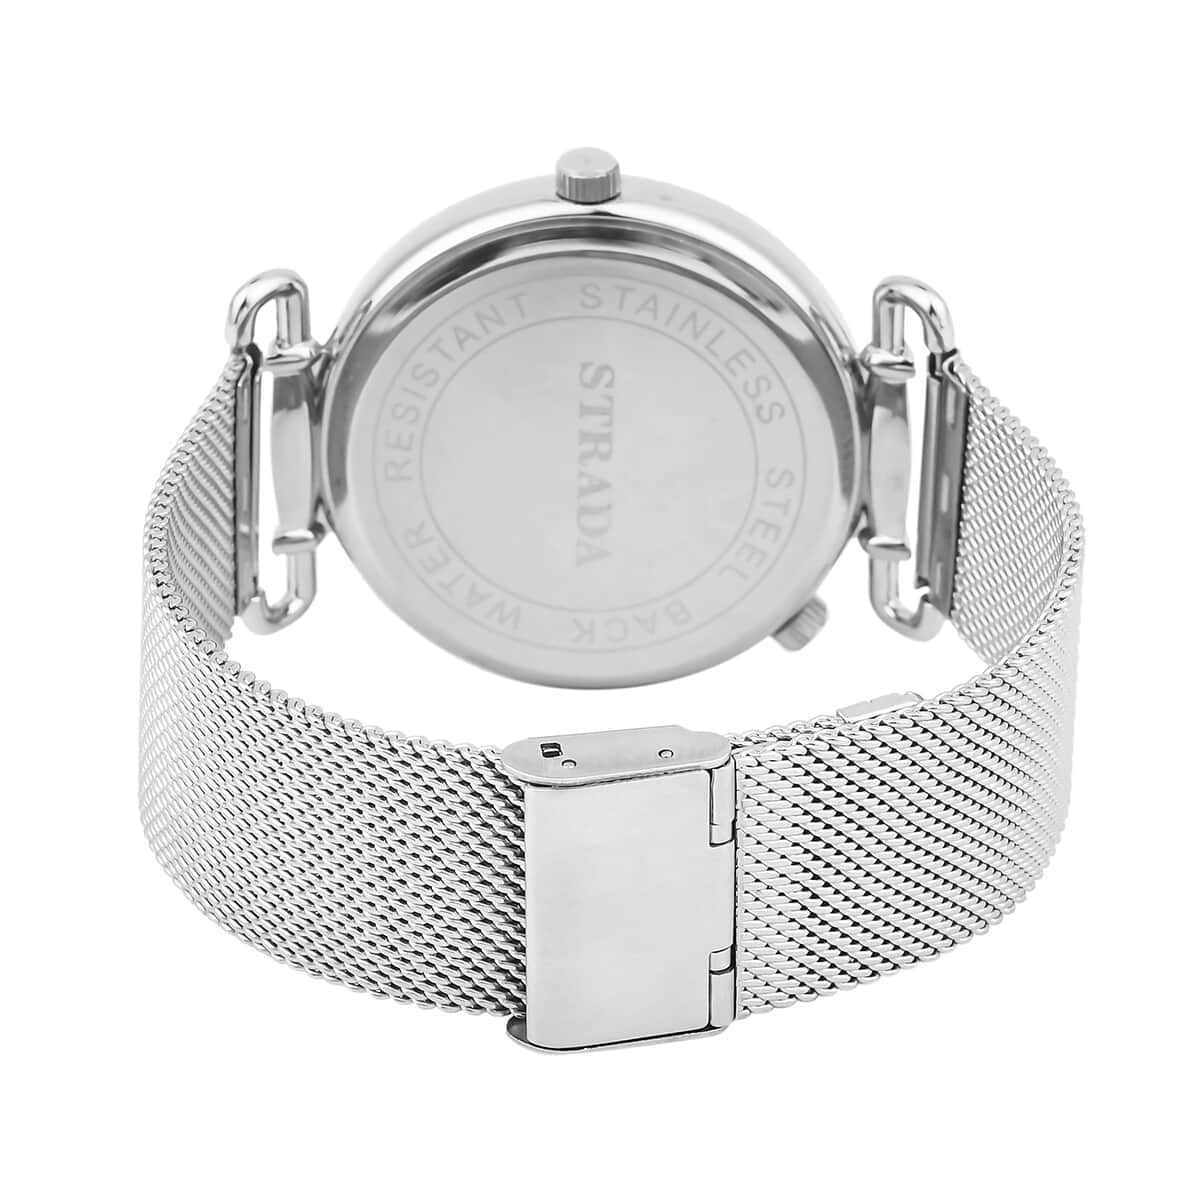 STRADA Double Japanese Movement Watch with Stainless Steel Mesh Strap (44mm), Dual Time Zones image number 5